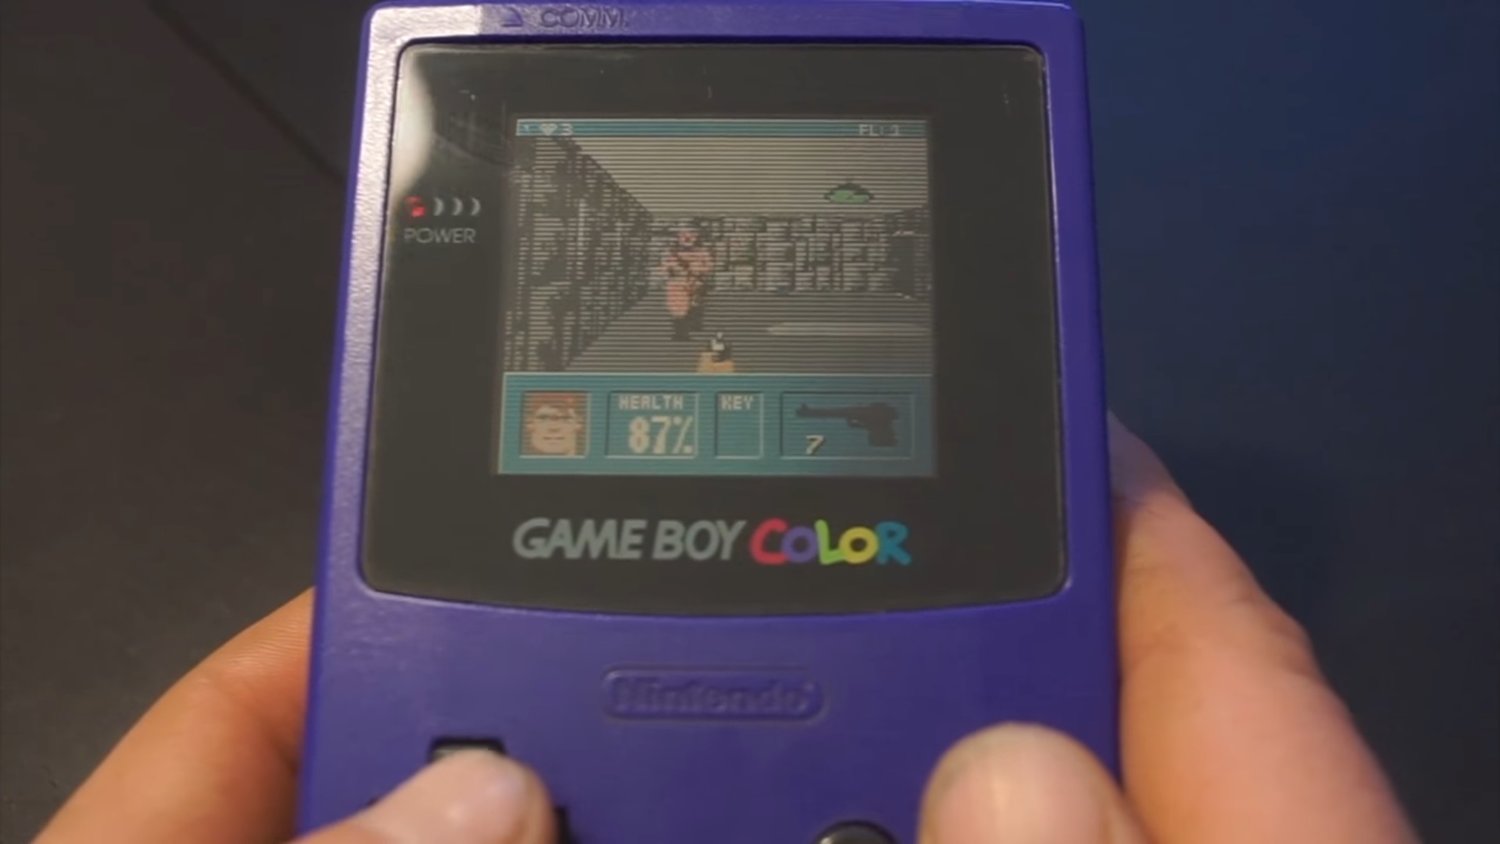 Wolfenstein on the Gameboy Color. Now that is an accomplishment!